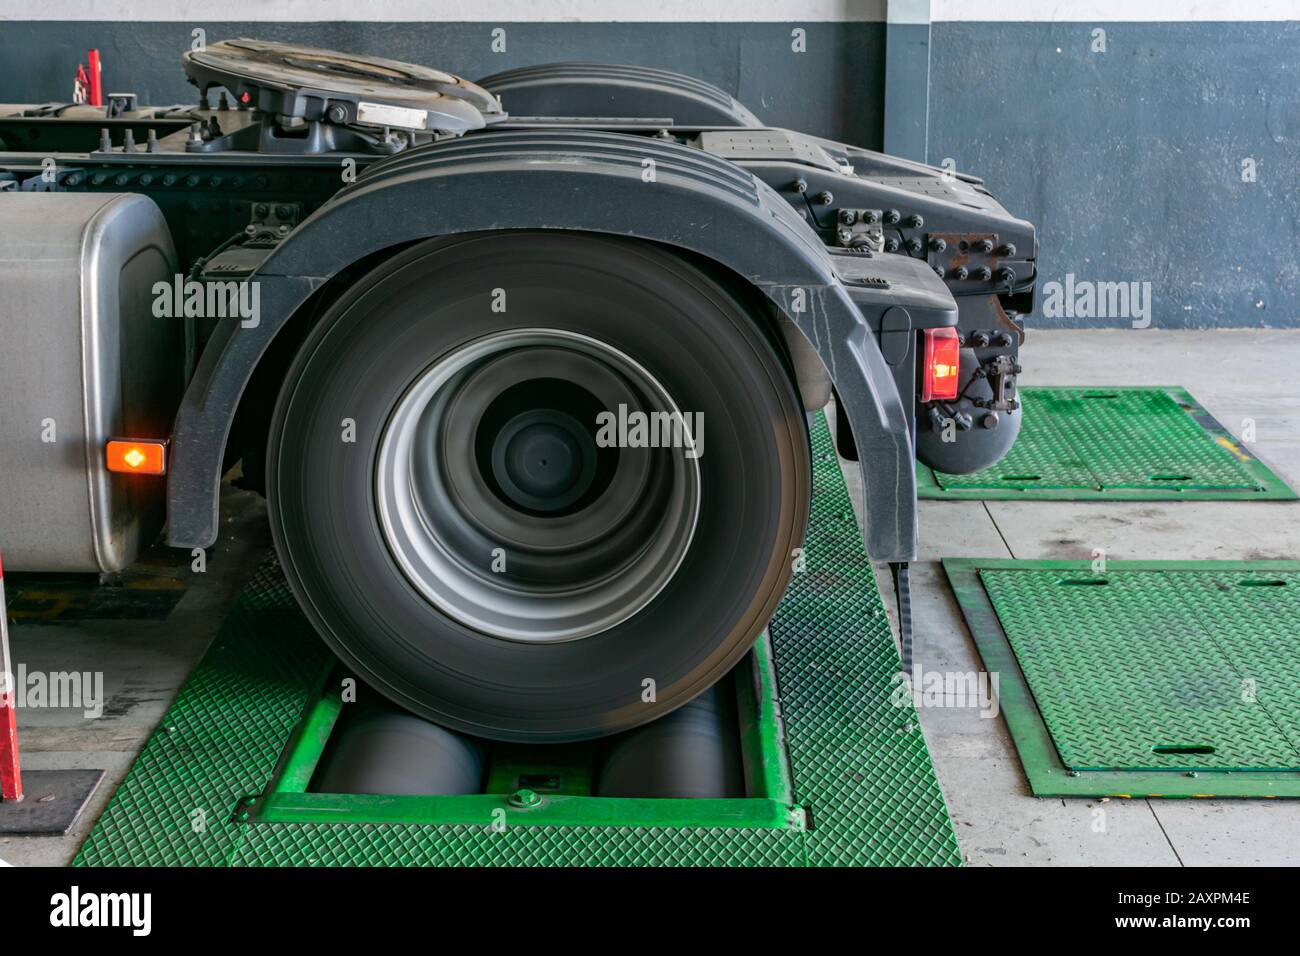 Truck wheel rotating on rollers to control the brakes and measure distances traveled by the tire for the vehicle's job registration device. Stock Photo